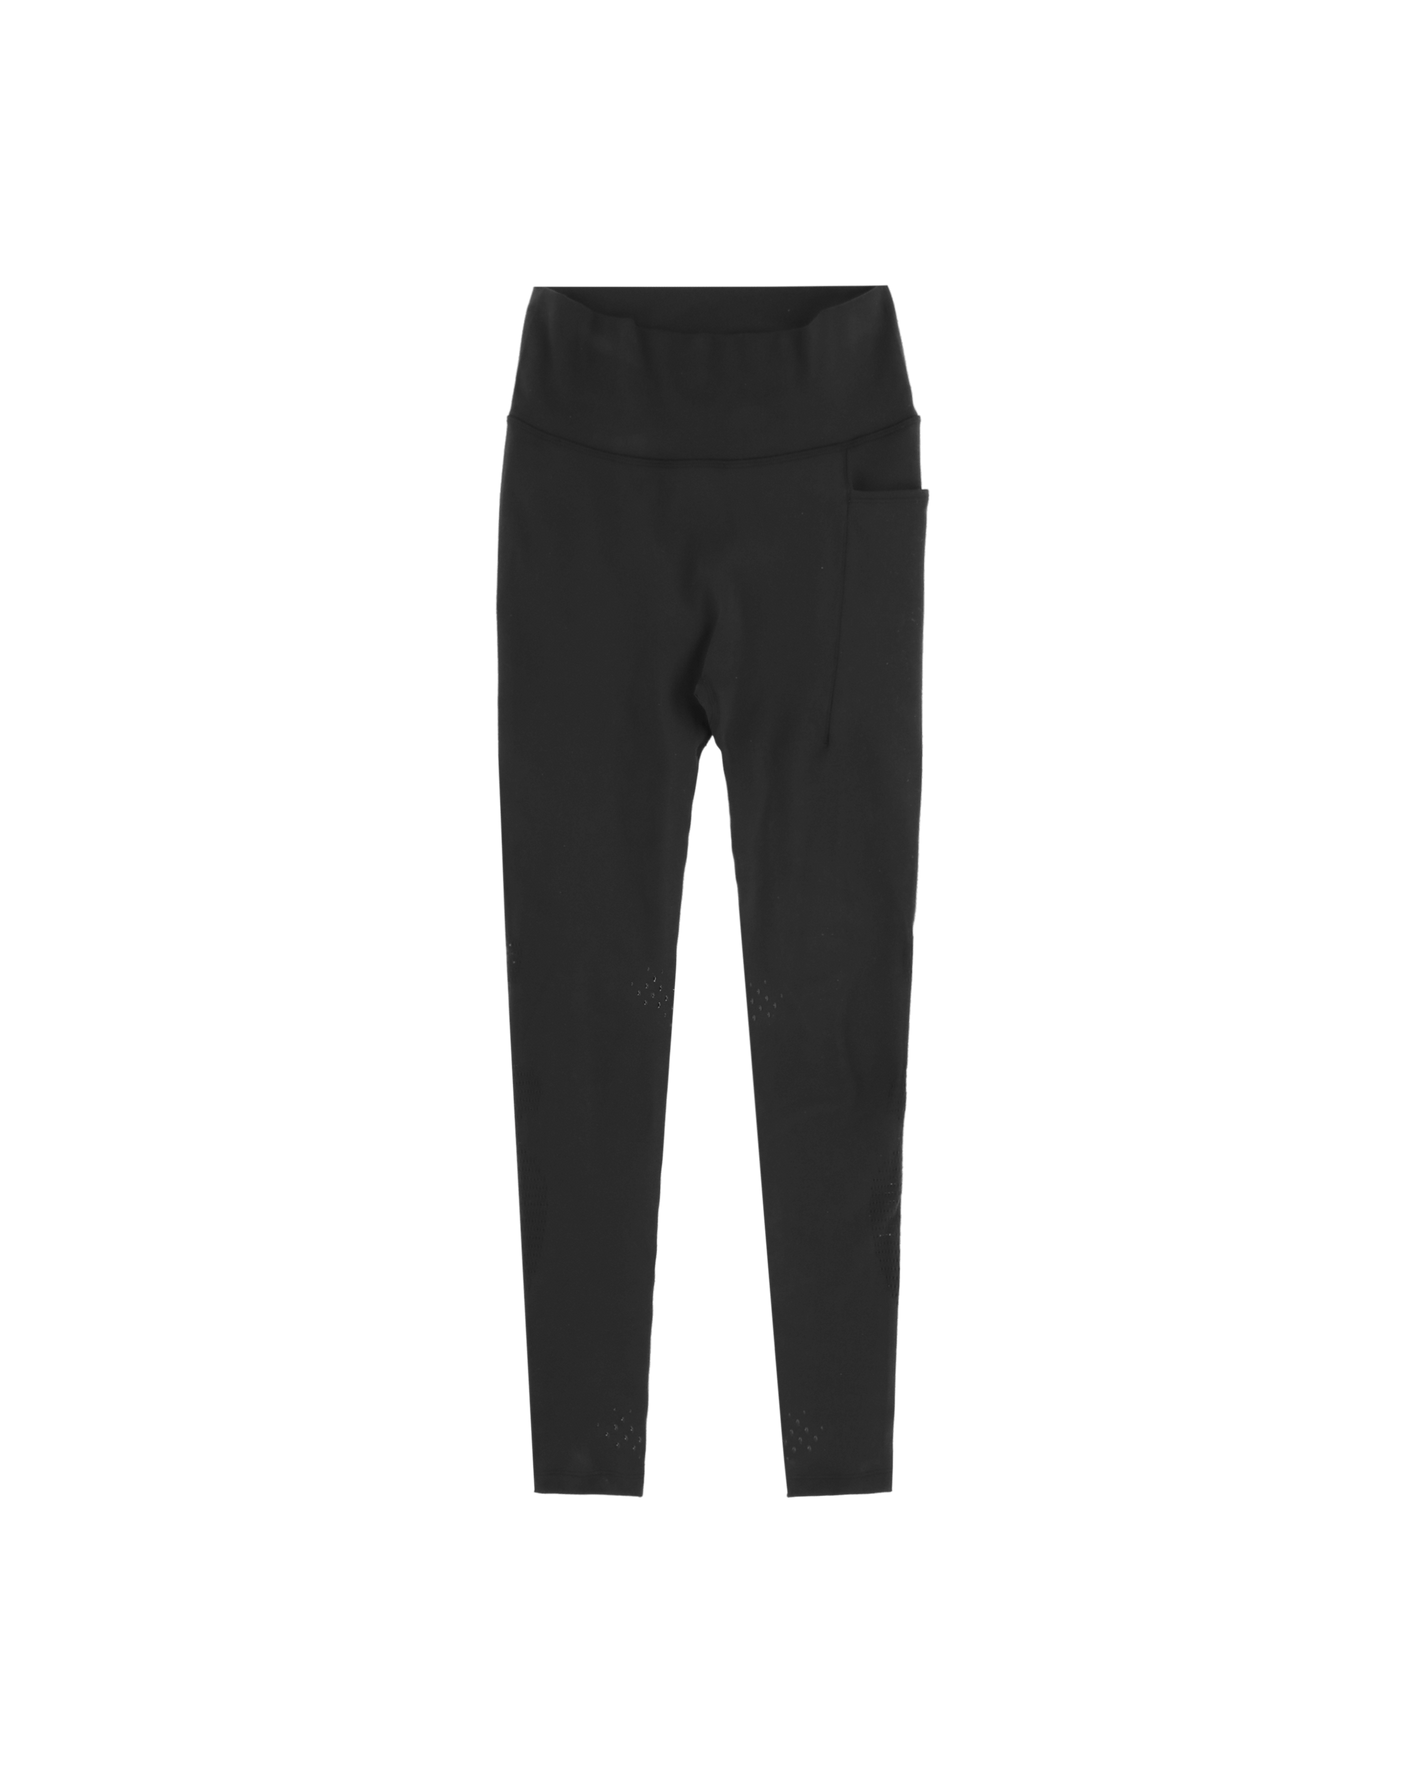 Nike Special Project Wmns Nrg Mmw Df Tight Black Pants Trousers DD9427-010